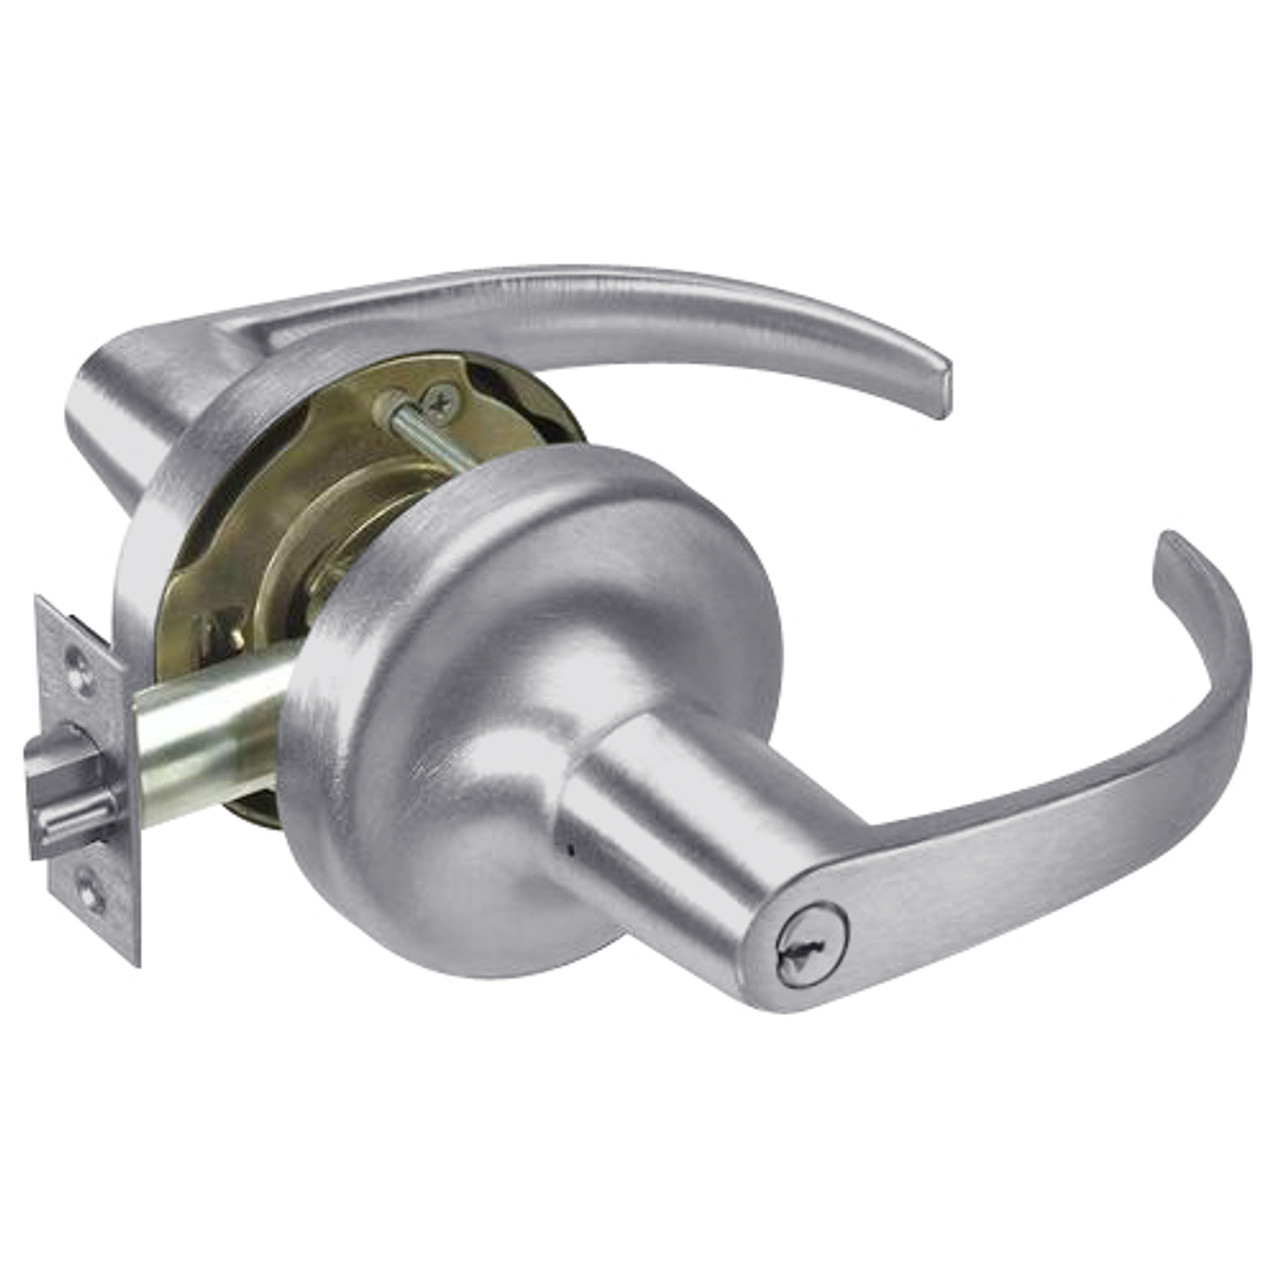 PB5304LN-626 Yale 5300LN Series Single Cylinder Entry Cylindrical Lock with Pacific Beach Lever in Satin Chrome